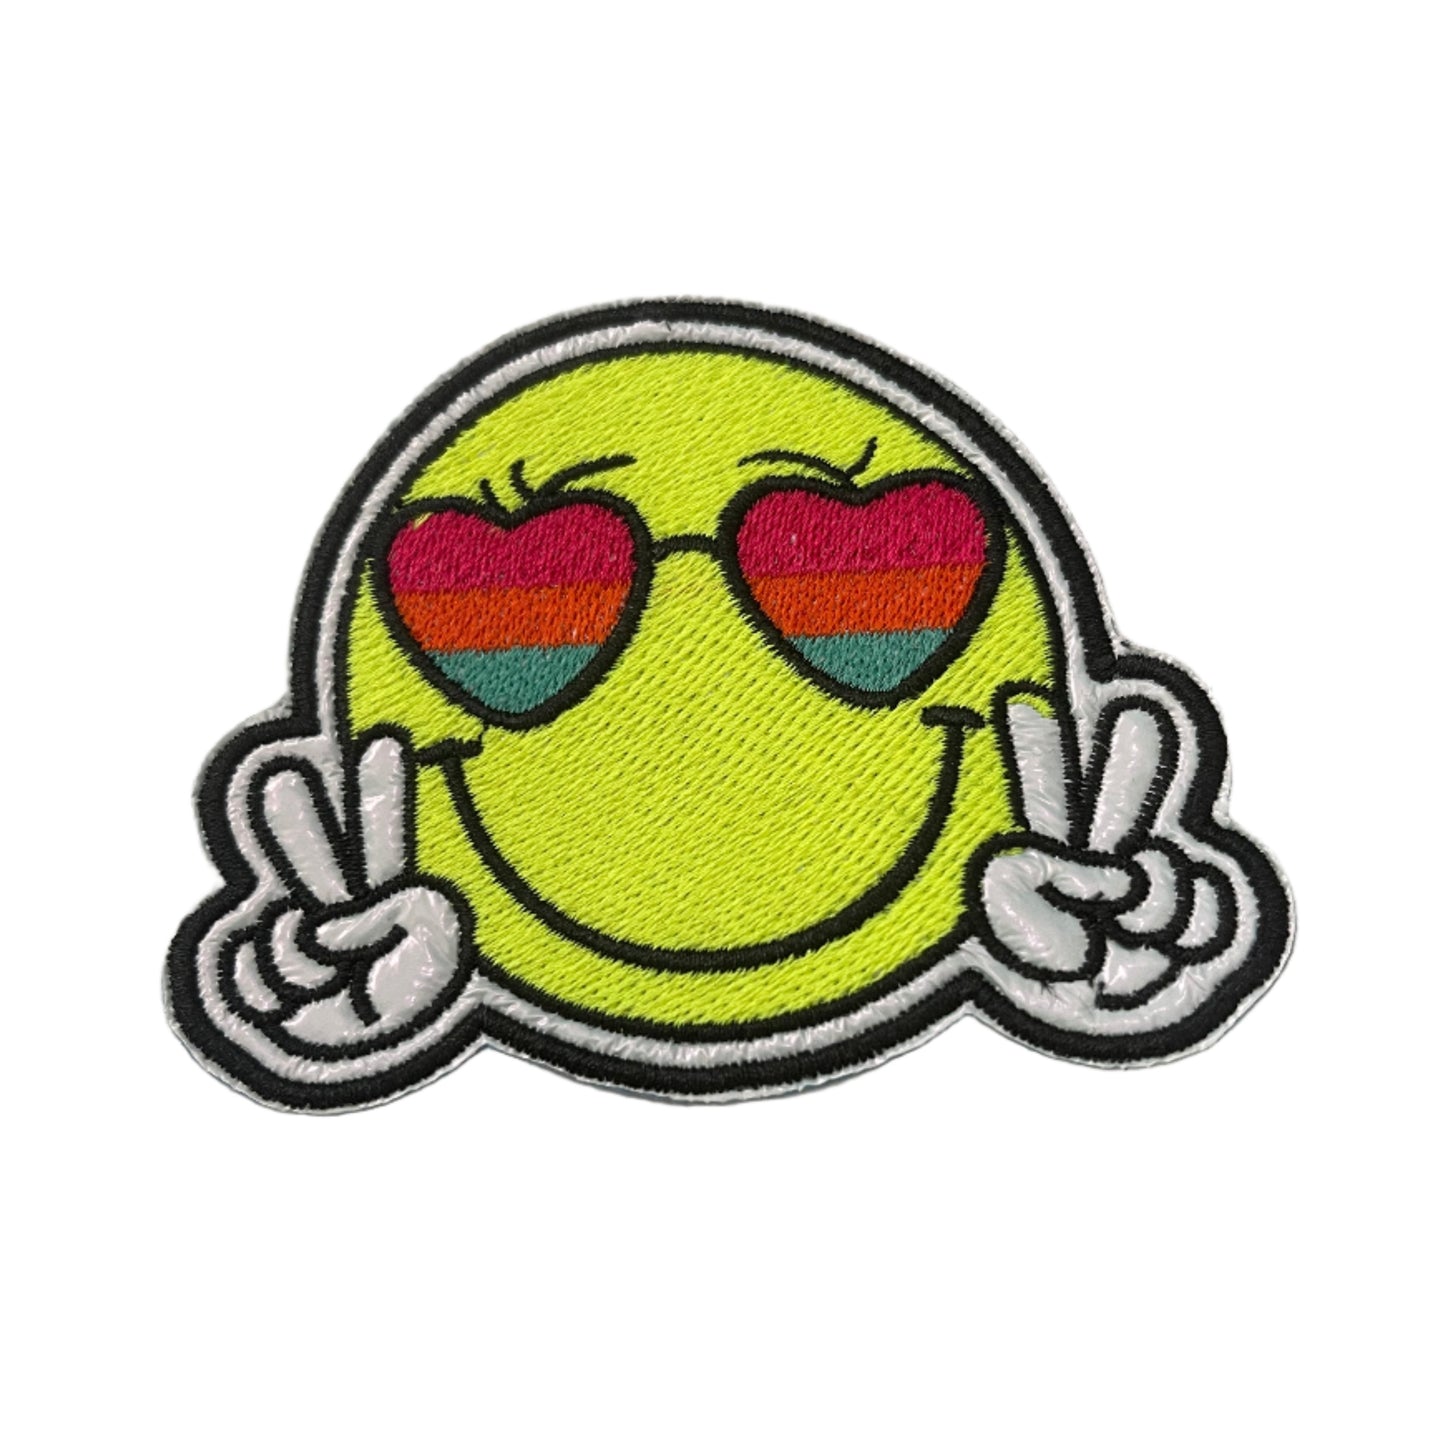 Handmade Peace Sign Smiley Iron-On Patch | Rainbow Heart Sunglasses, Yellow Smiley Face